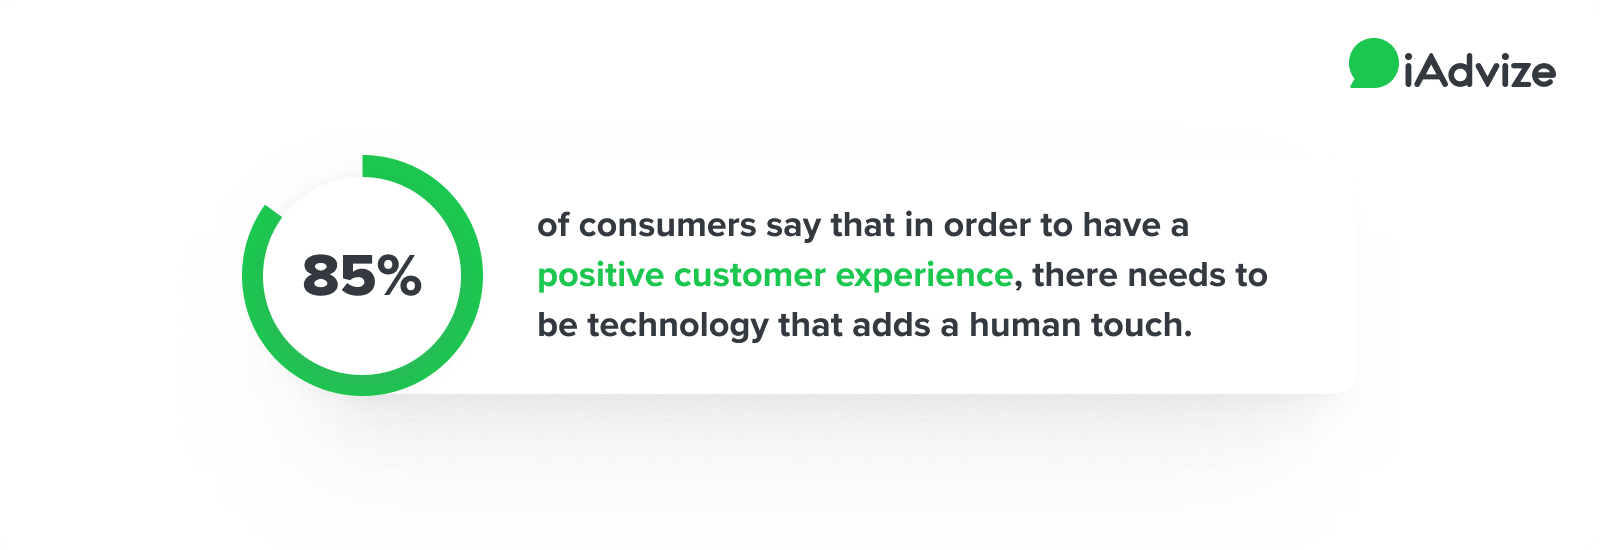 85% of consumers say that a human touch and technology are essential for a positive customer experience